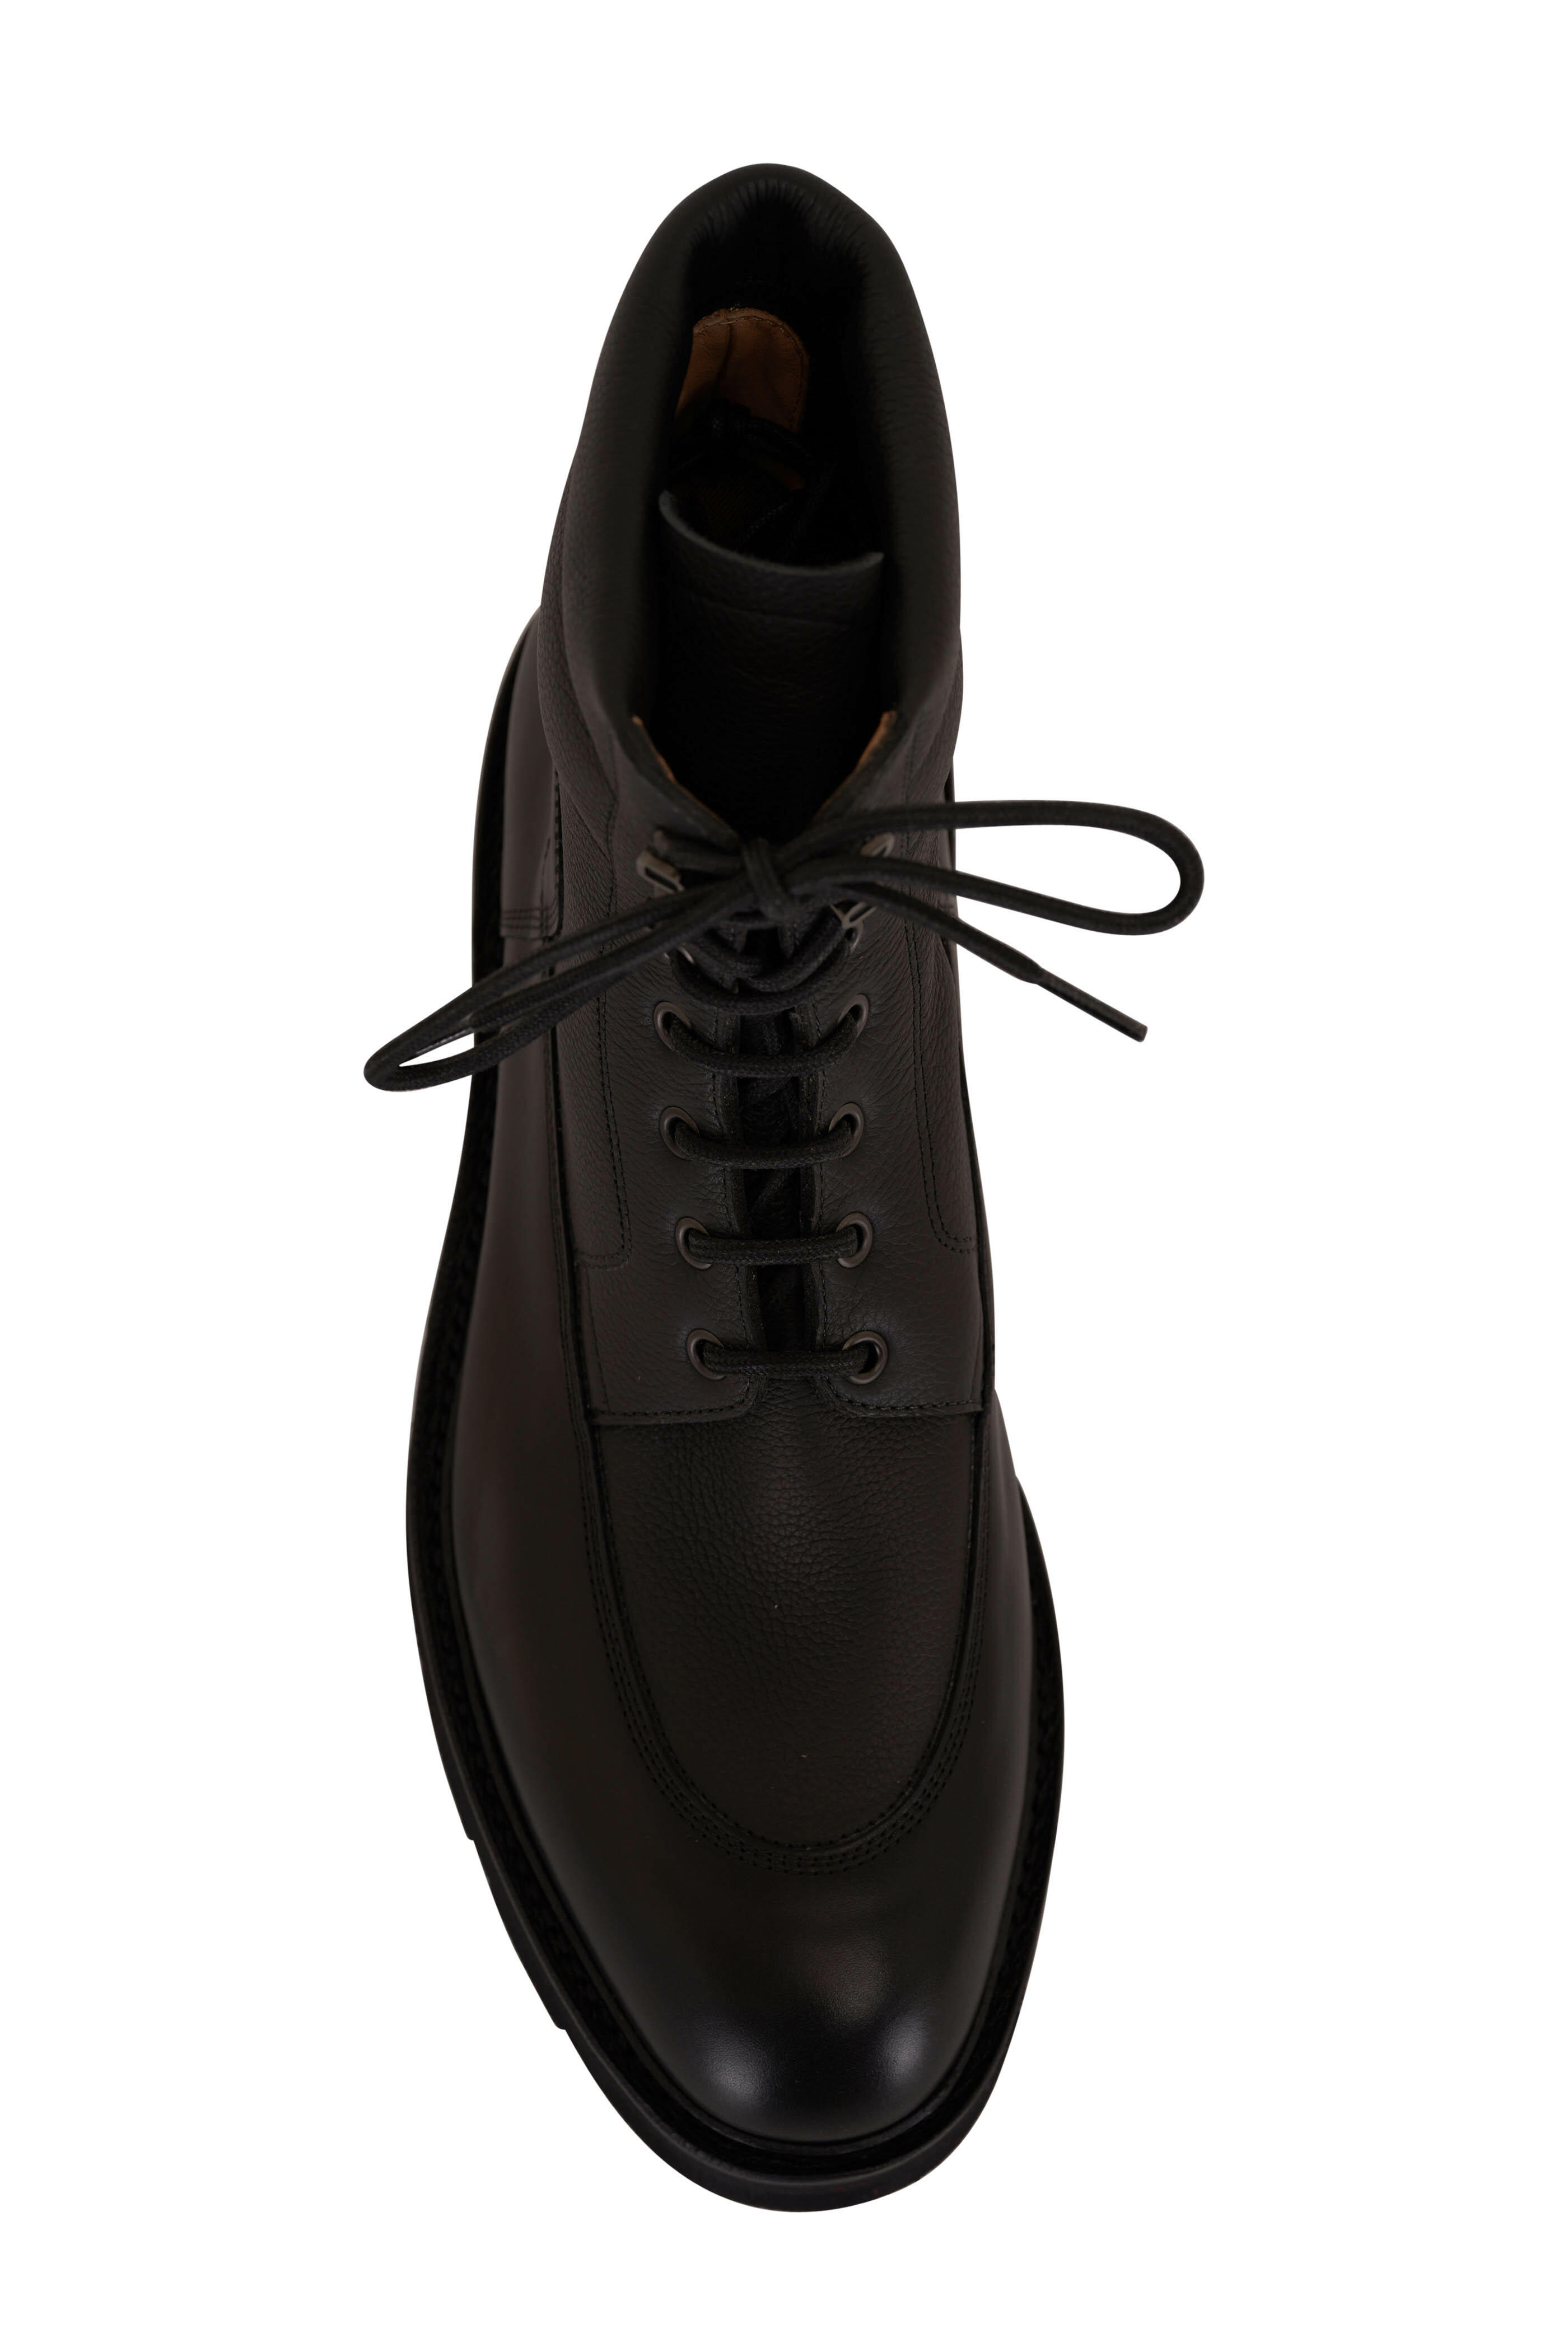 John Lobb - Weekend Black Pebbled Leather Boot | Mitchell Stores